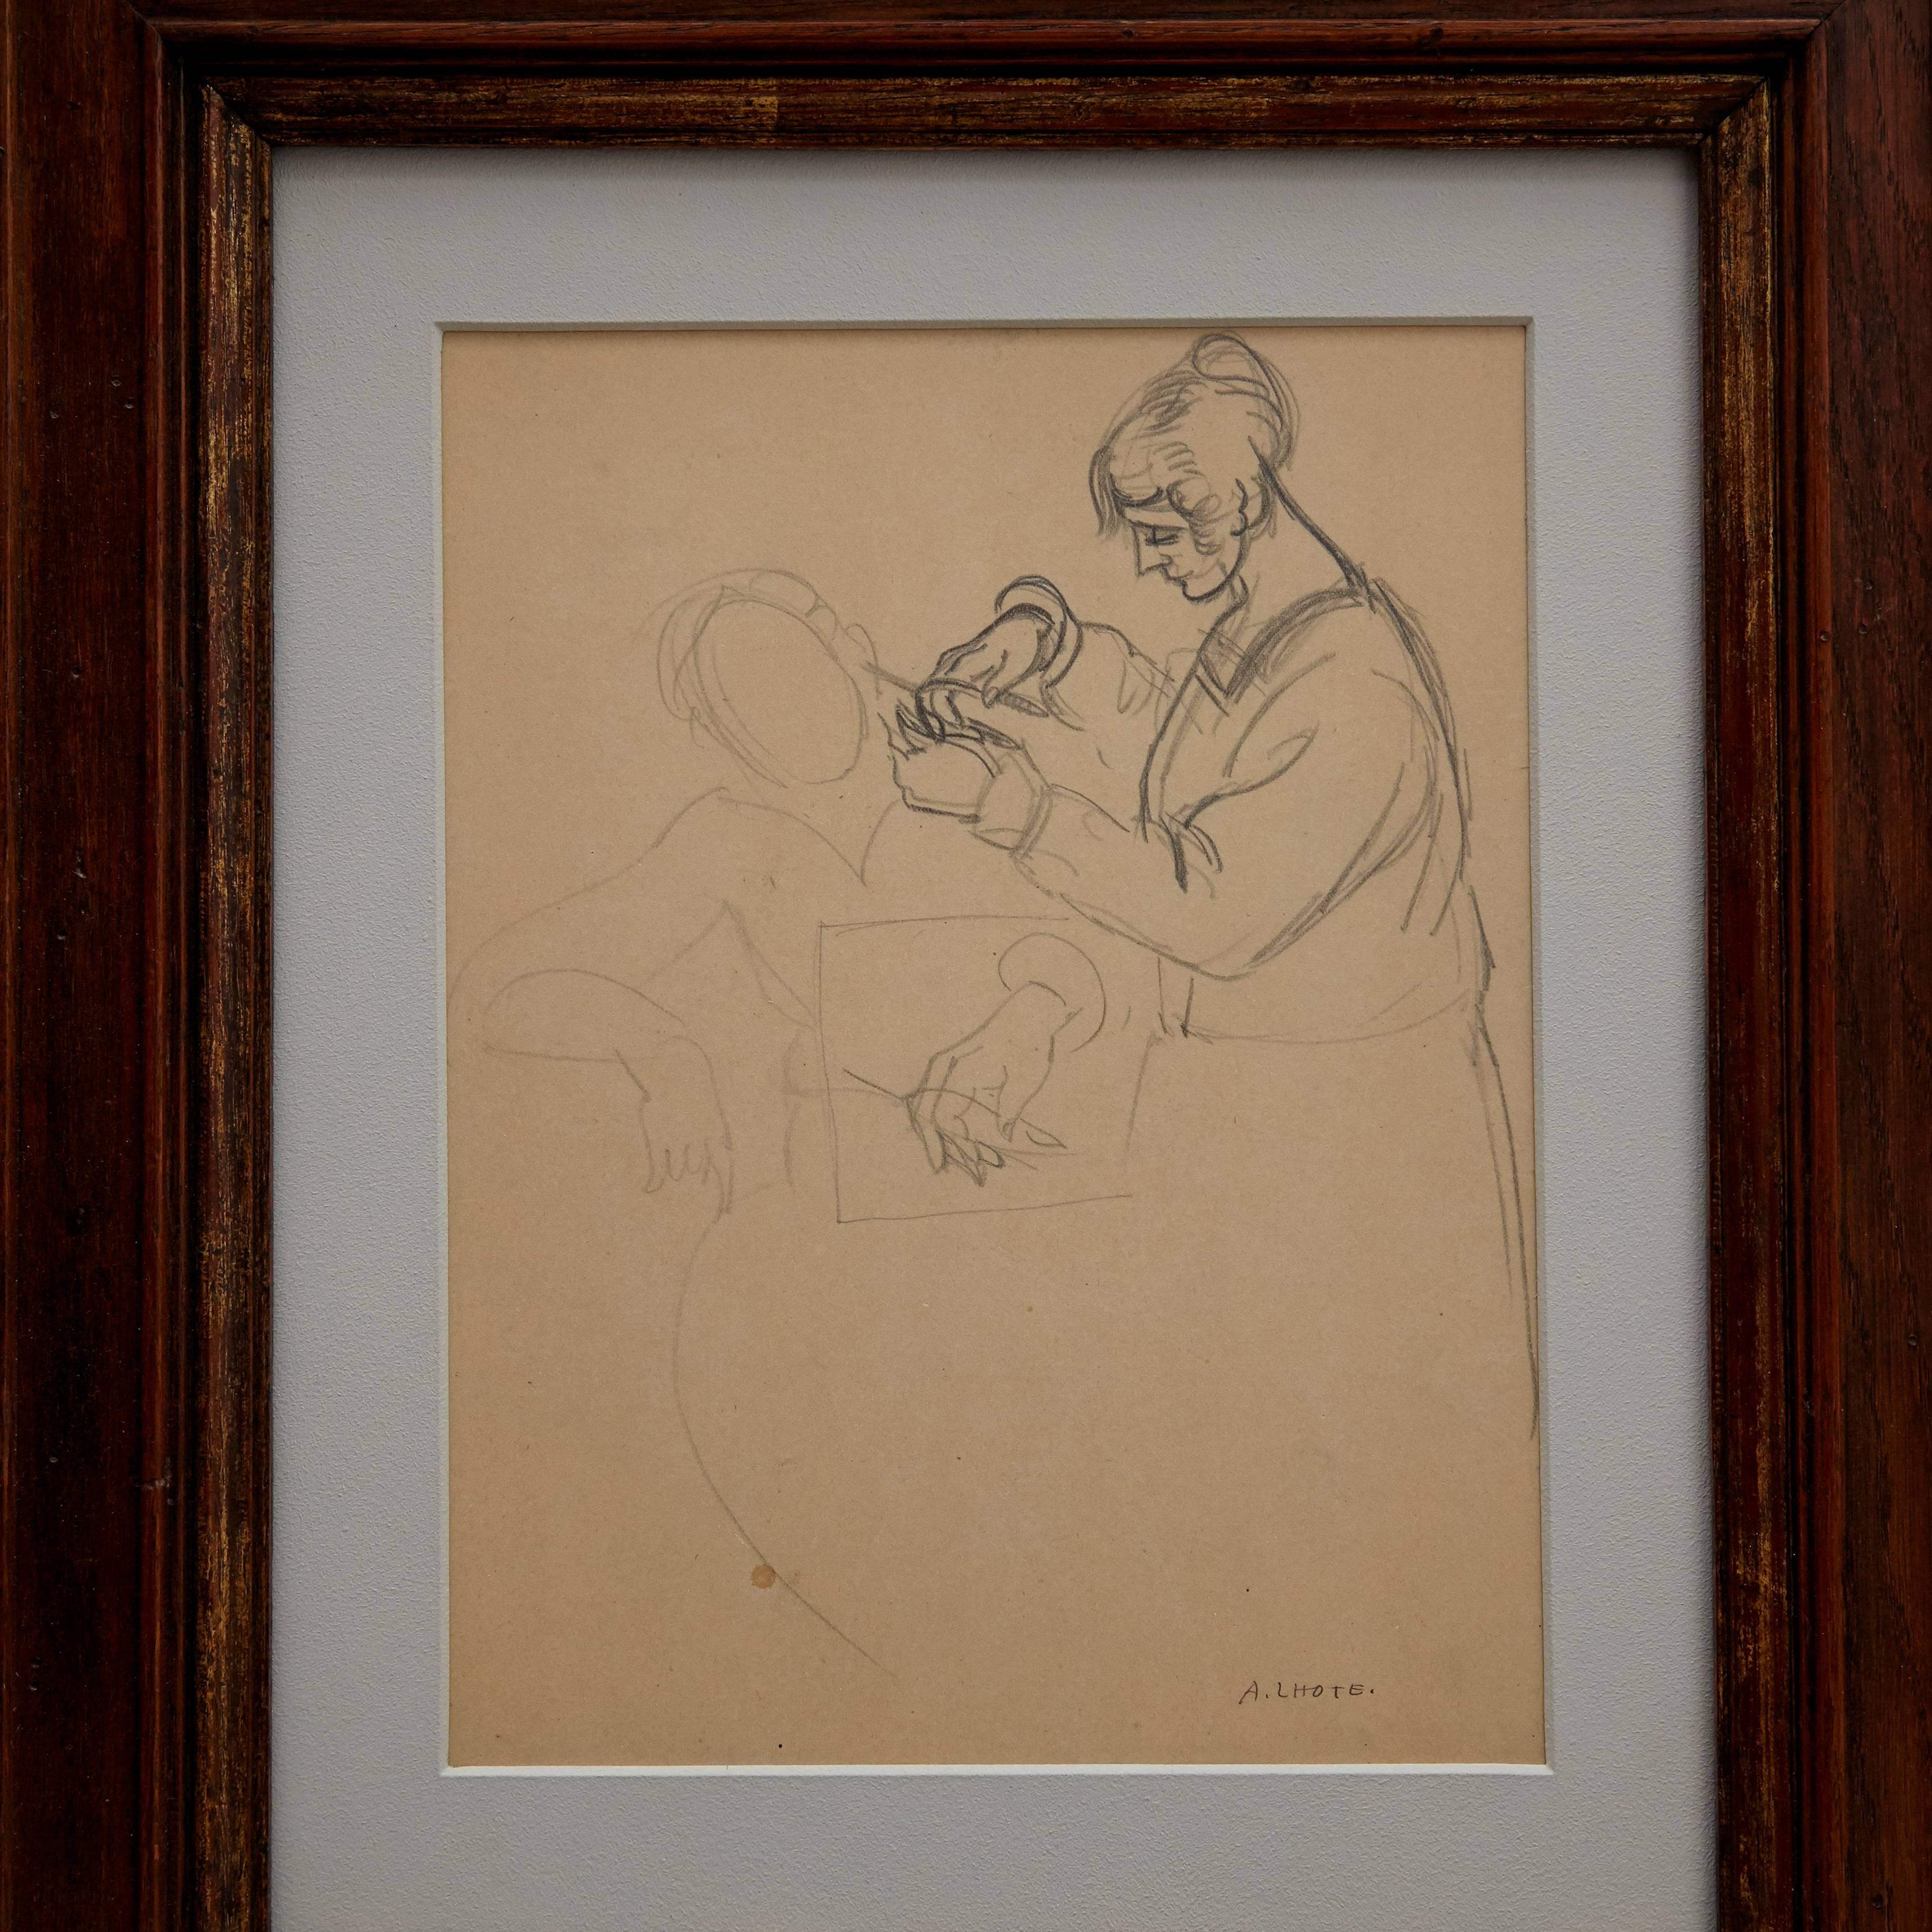 Drawing by André Lhote, circa 1920.

Hand signed

Dimensions of the layer: 26 x 20 cm. Hand signed.

Framed in 19th century frame.

In original condition.

André Lhote was born in 1885 and was a French Cubist painter of figure subjects,